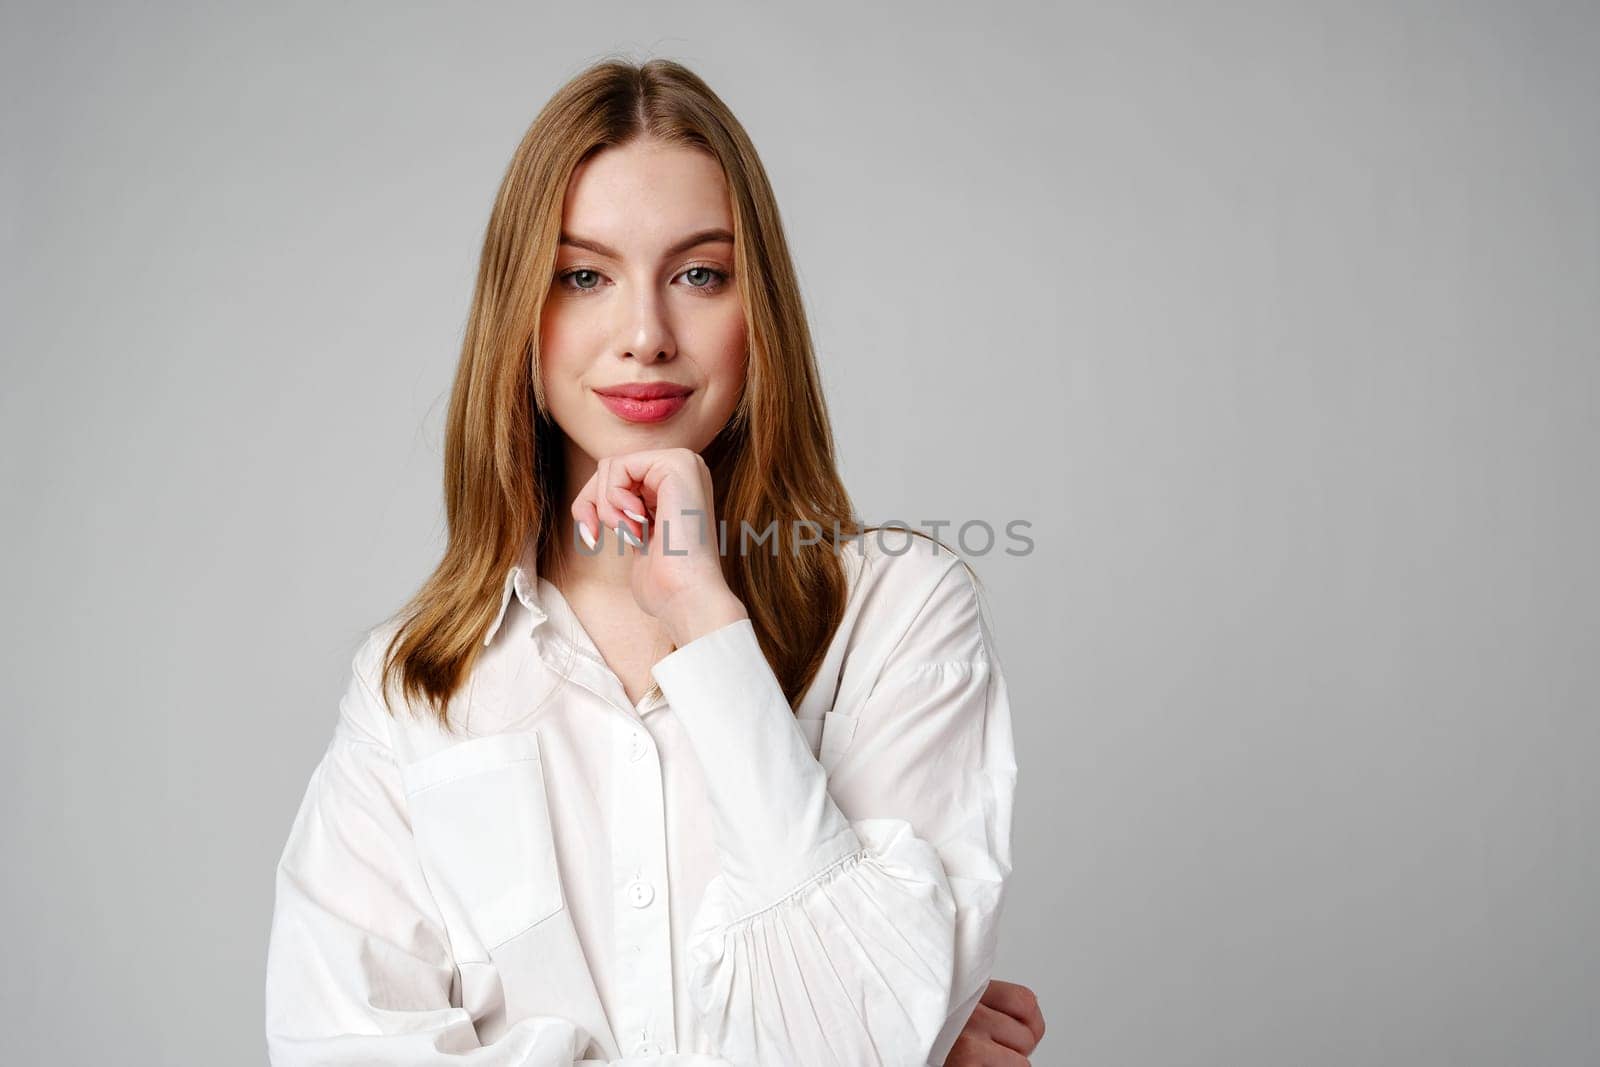 Joyful Young Blonde Woman Smiling against gray background by Fabrikasimf